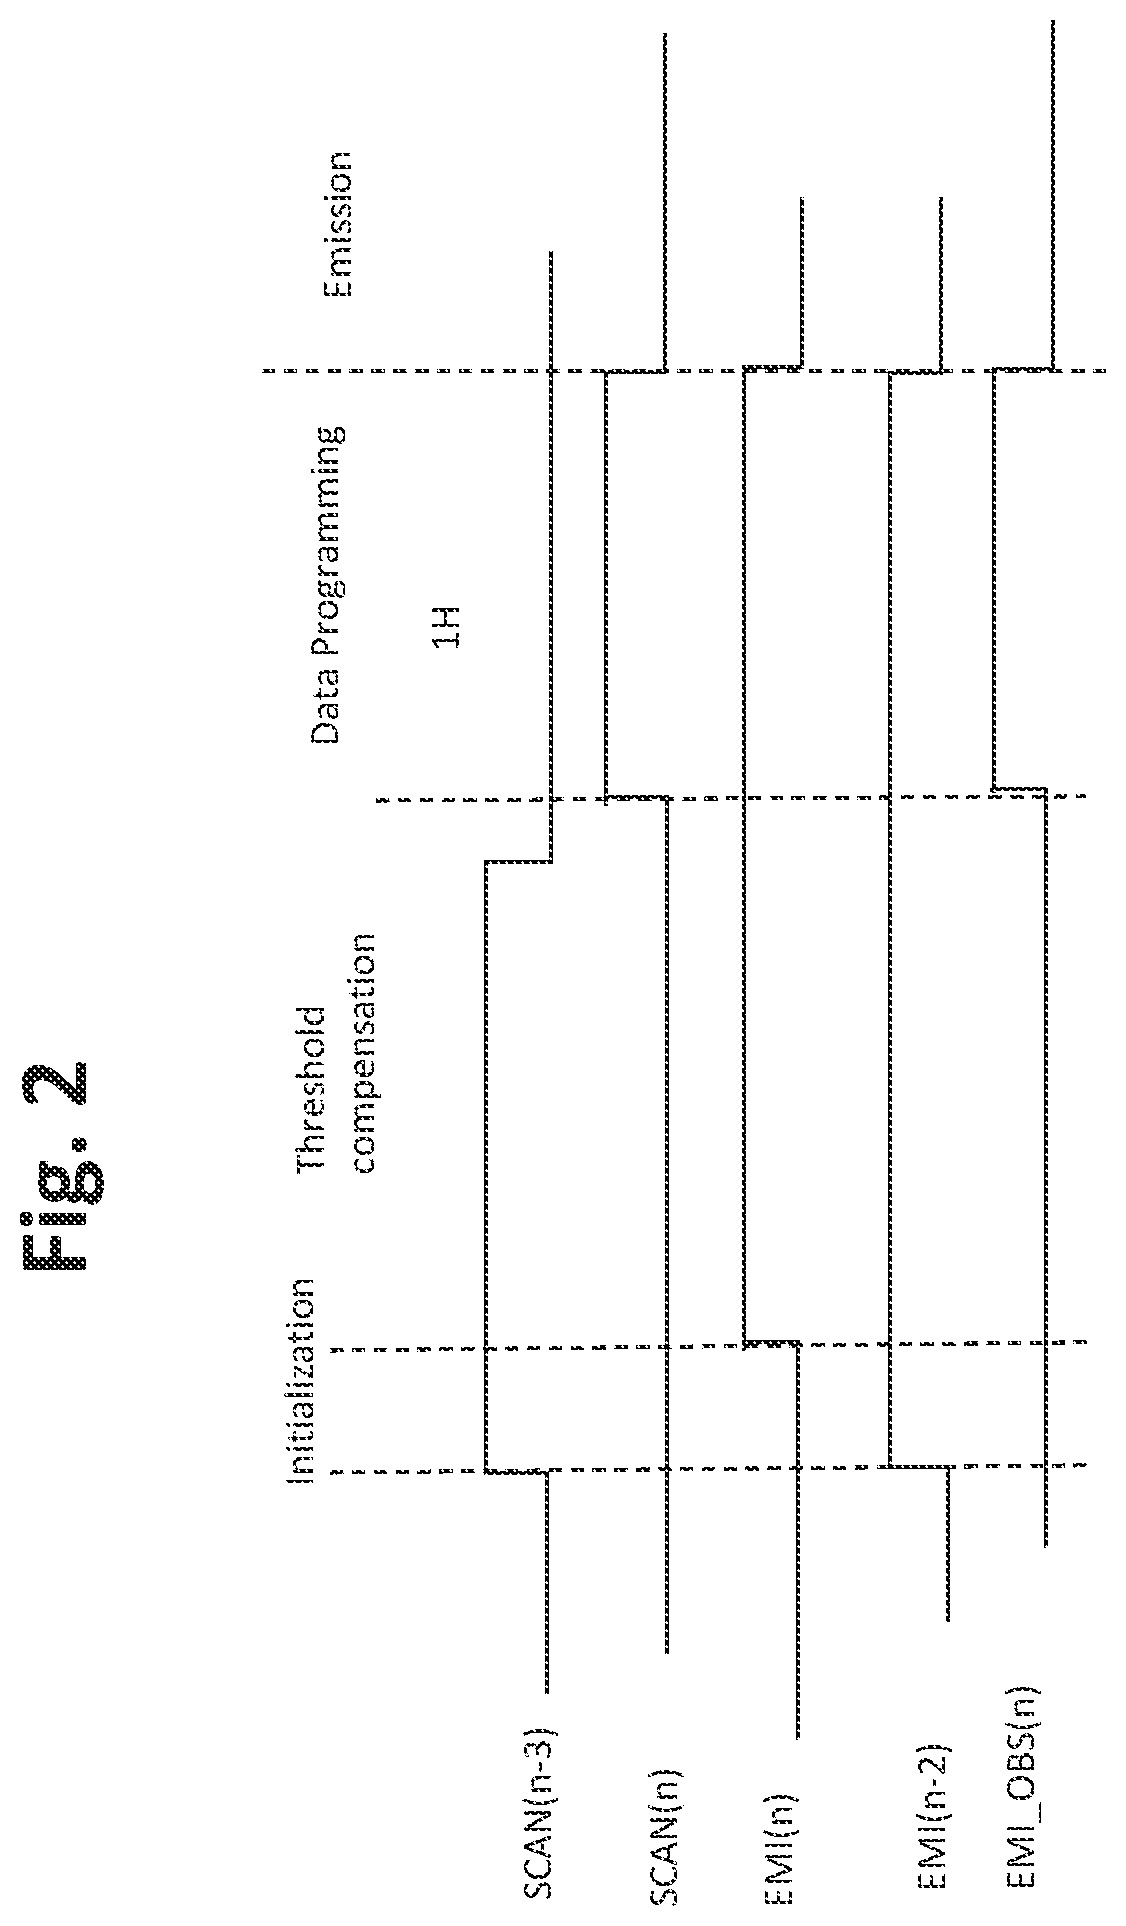 TFT pixel threshold voltage compensation circuit with a source follower